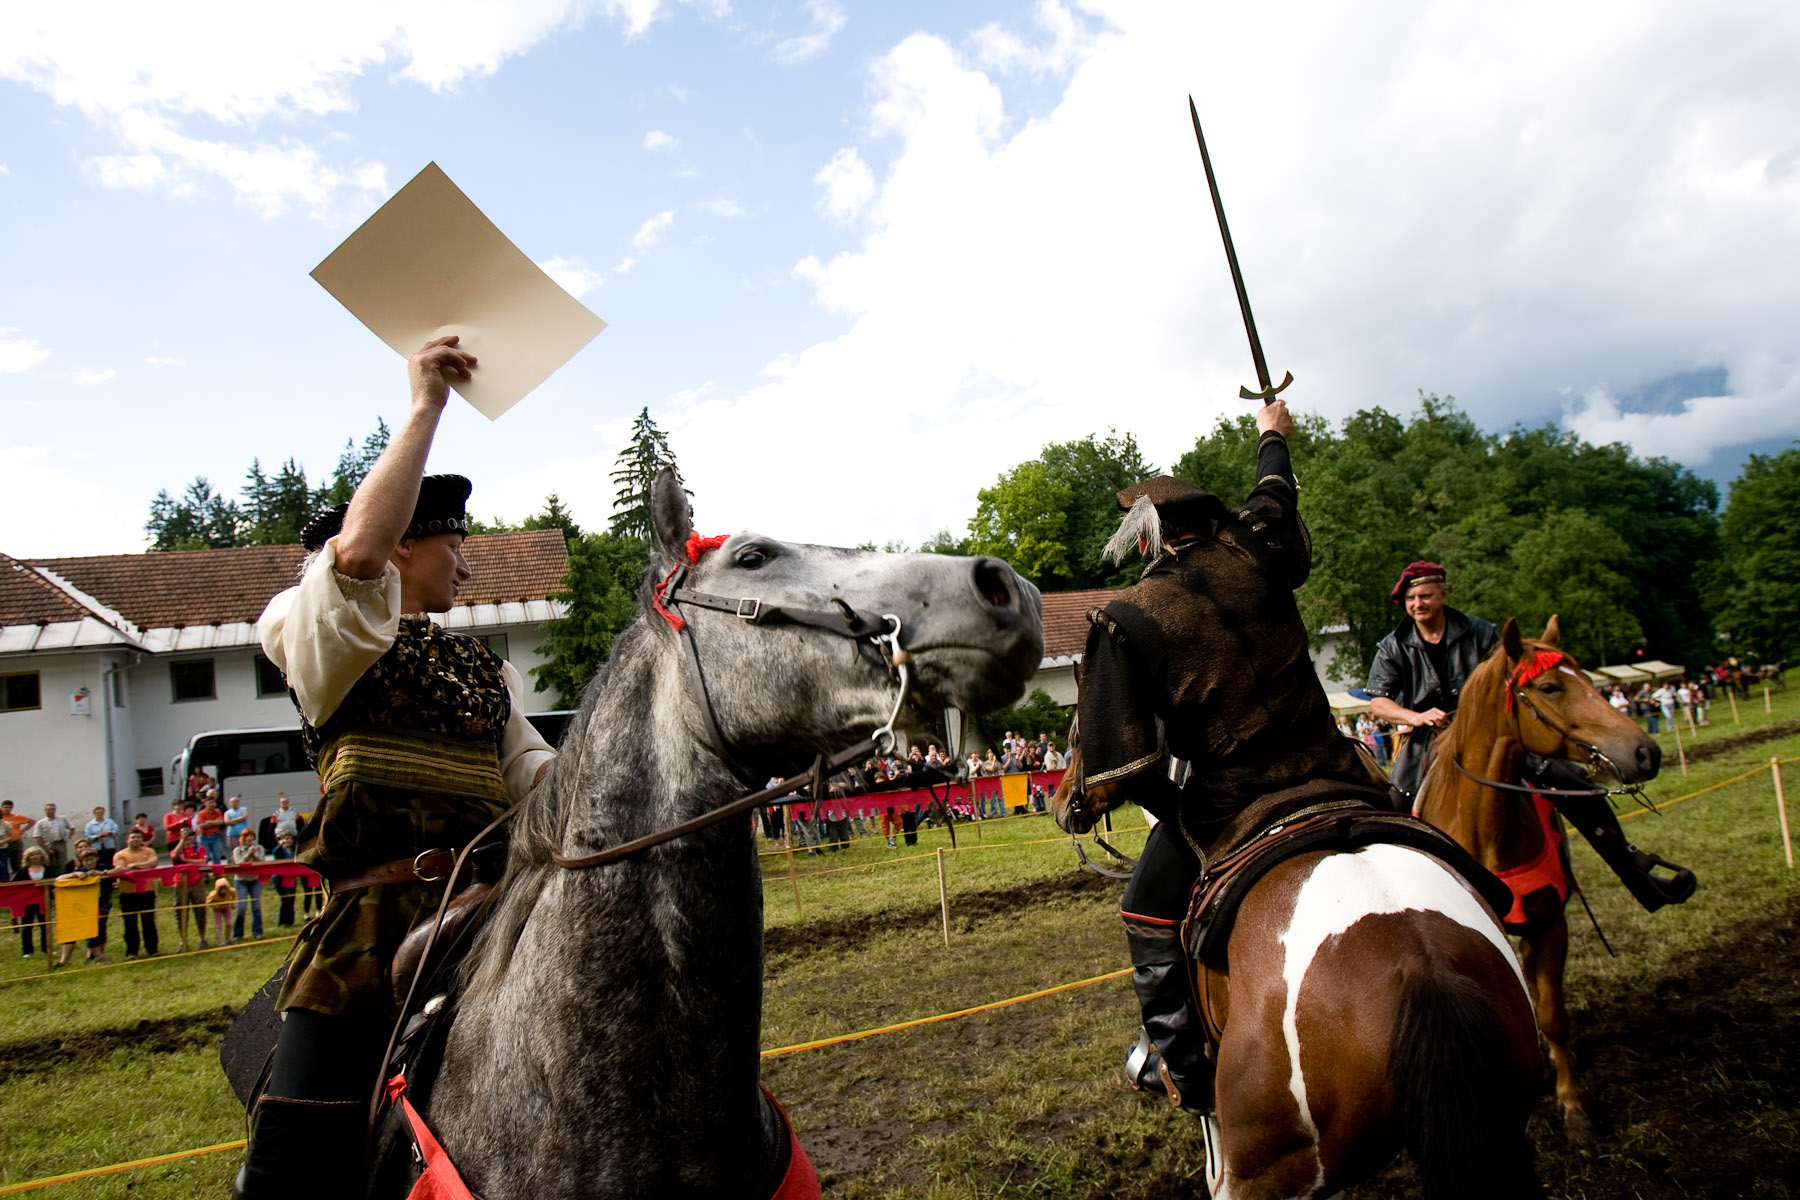 A team of horsemen celebrates victory at a Medieval event in Bled, on June 8, 2008.